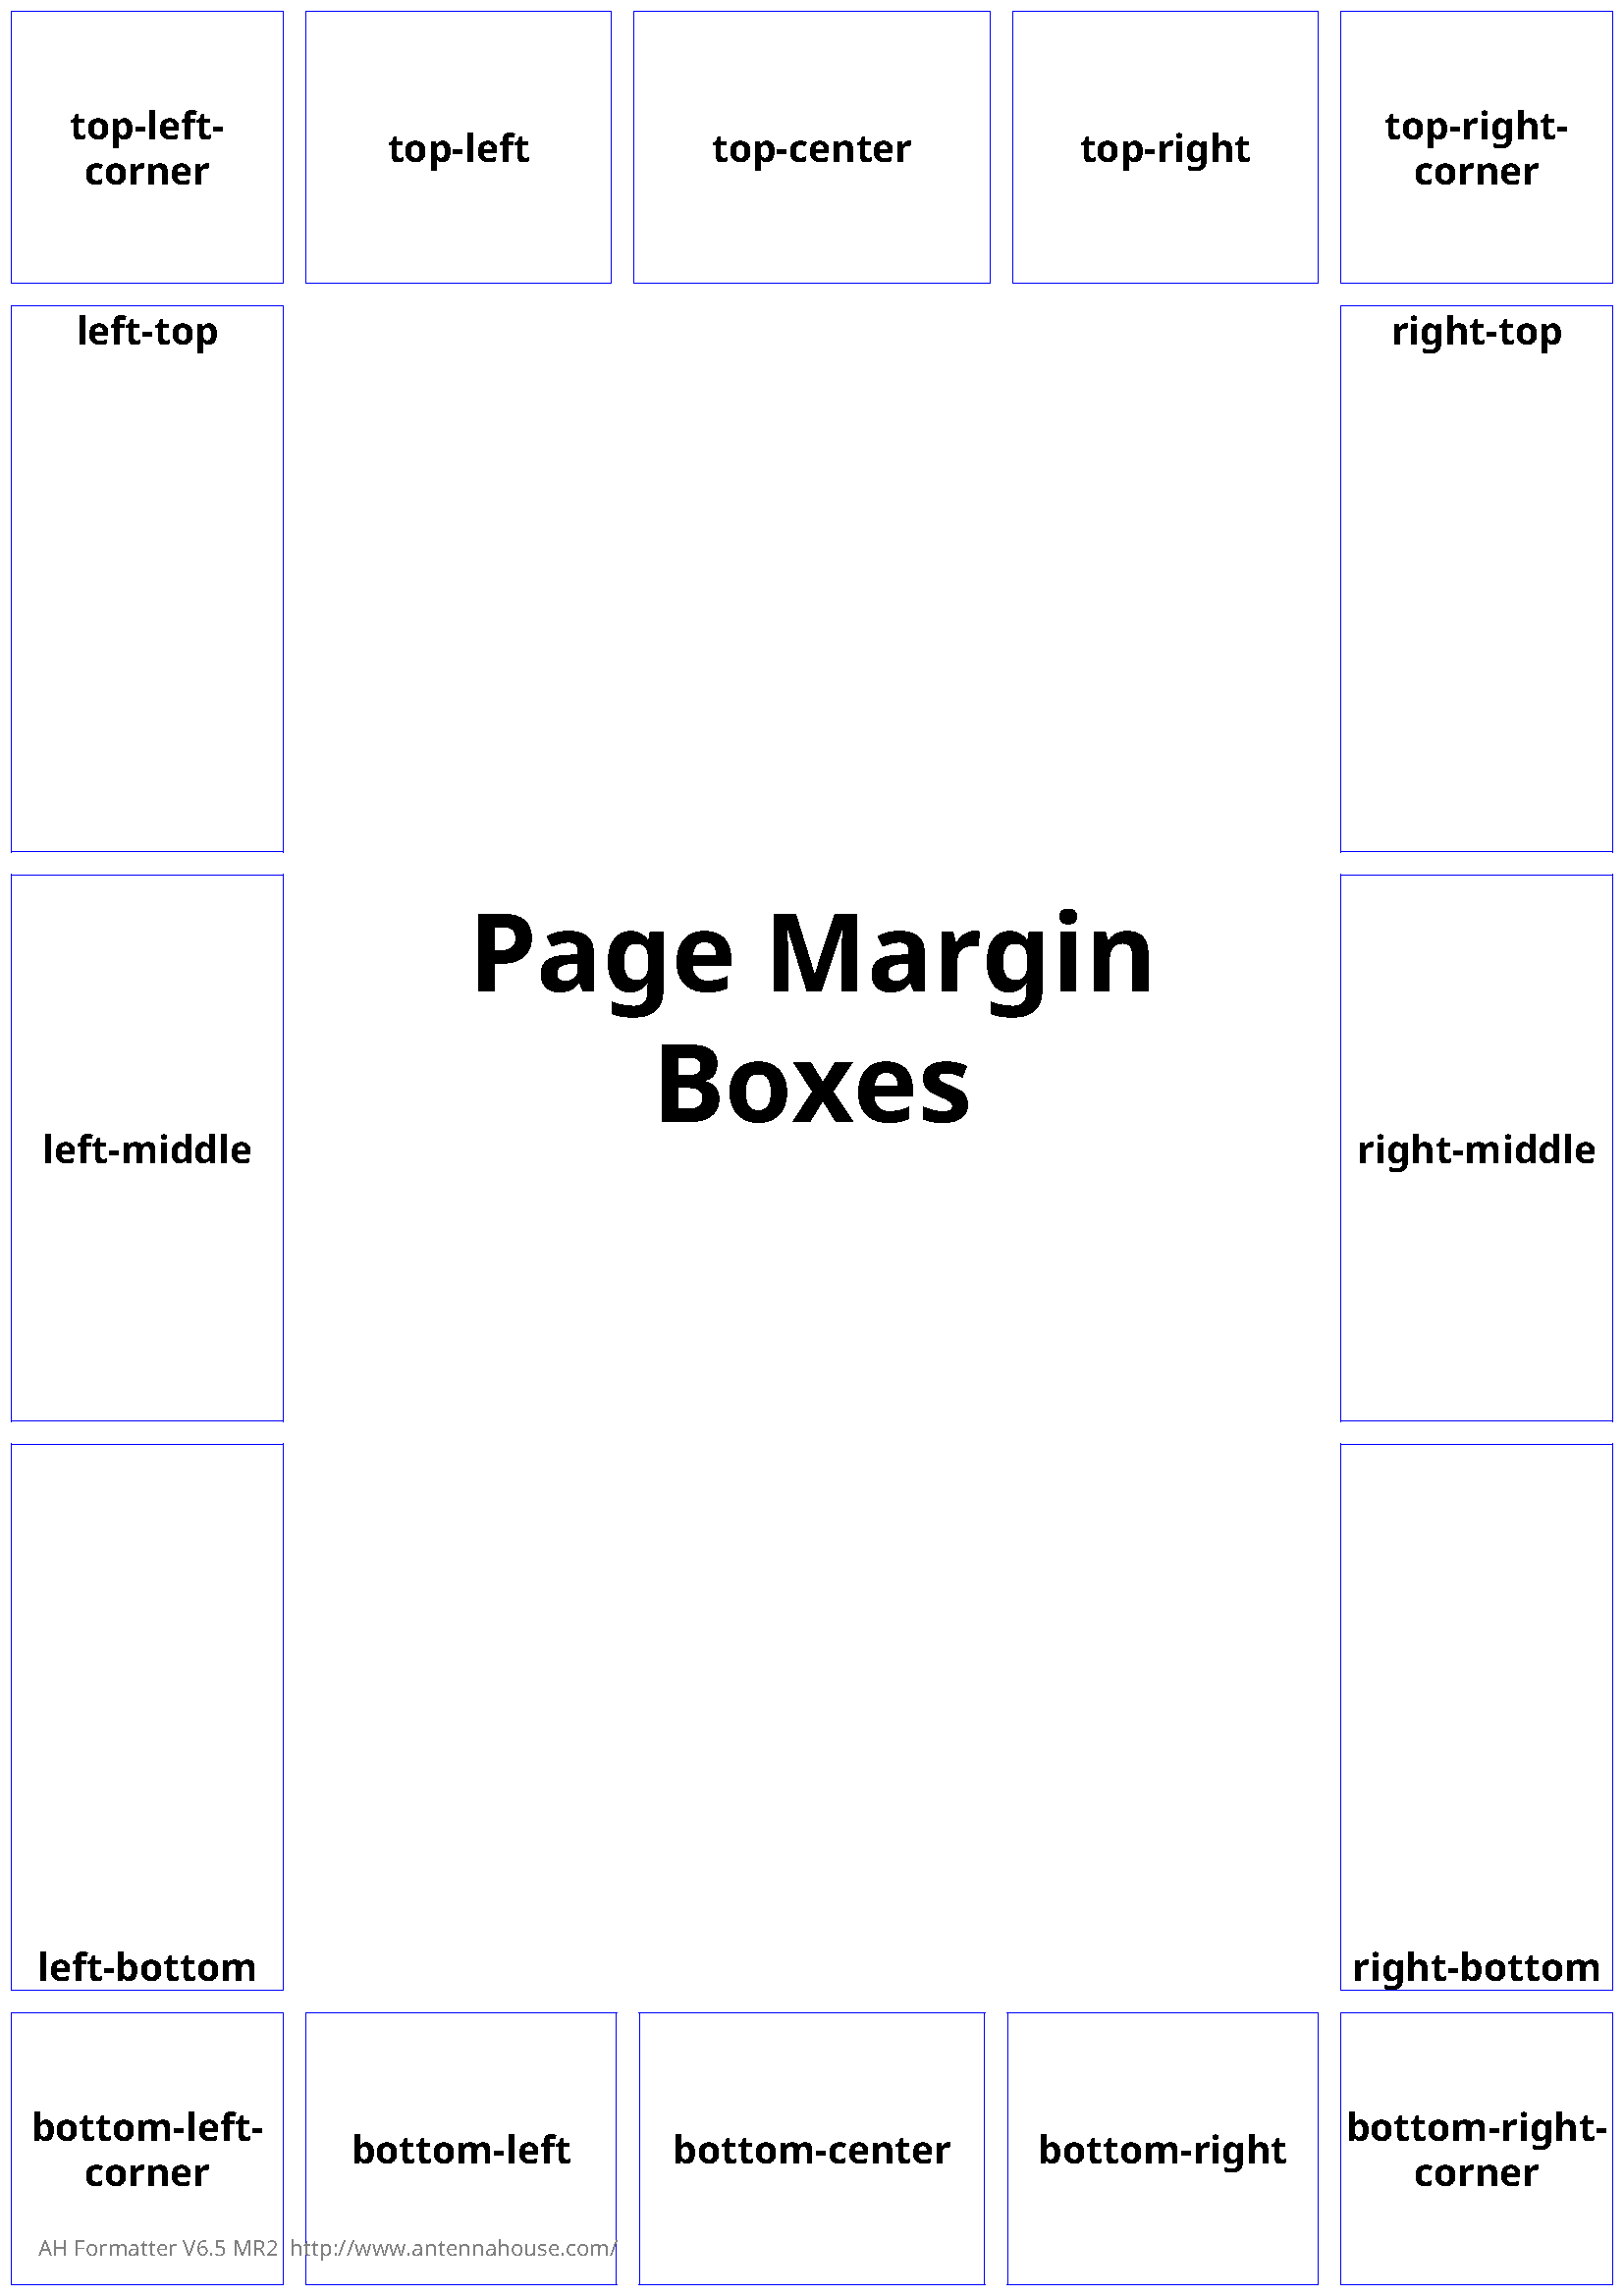 Shows the twelve page margin boxes.